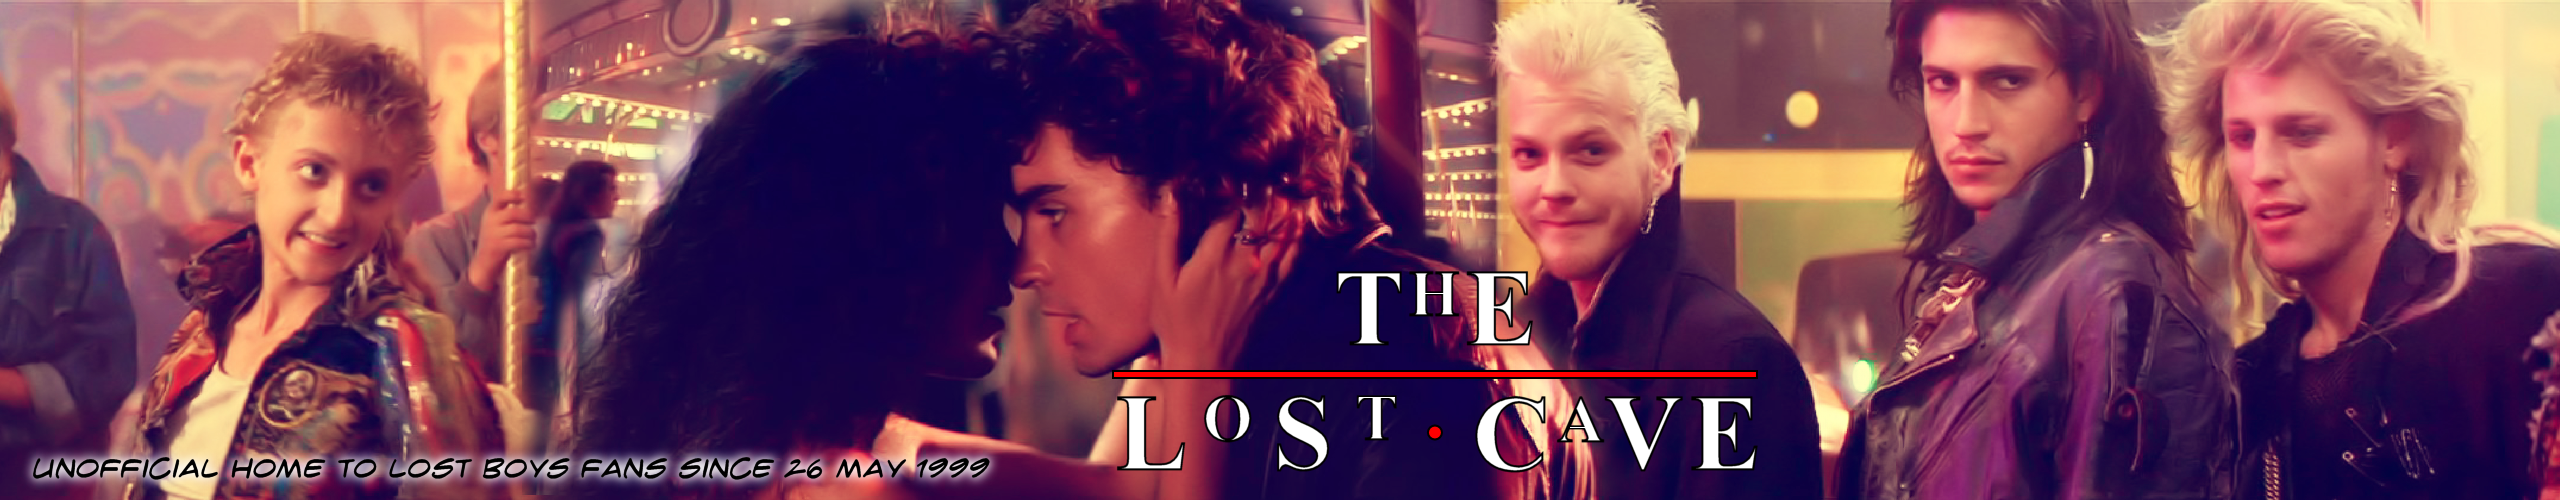 The Lost Cave :: A Lost Boys Fansite